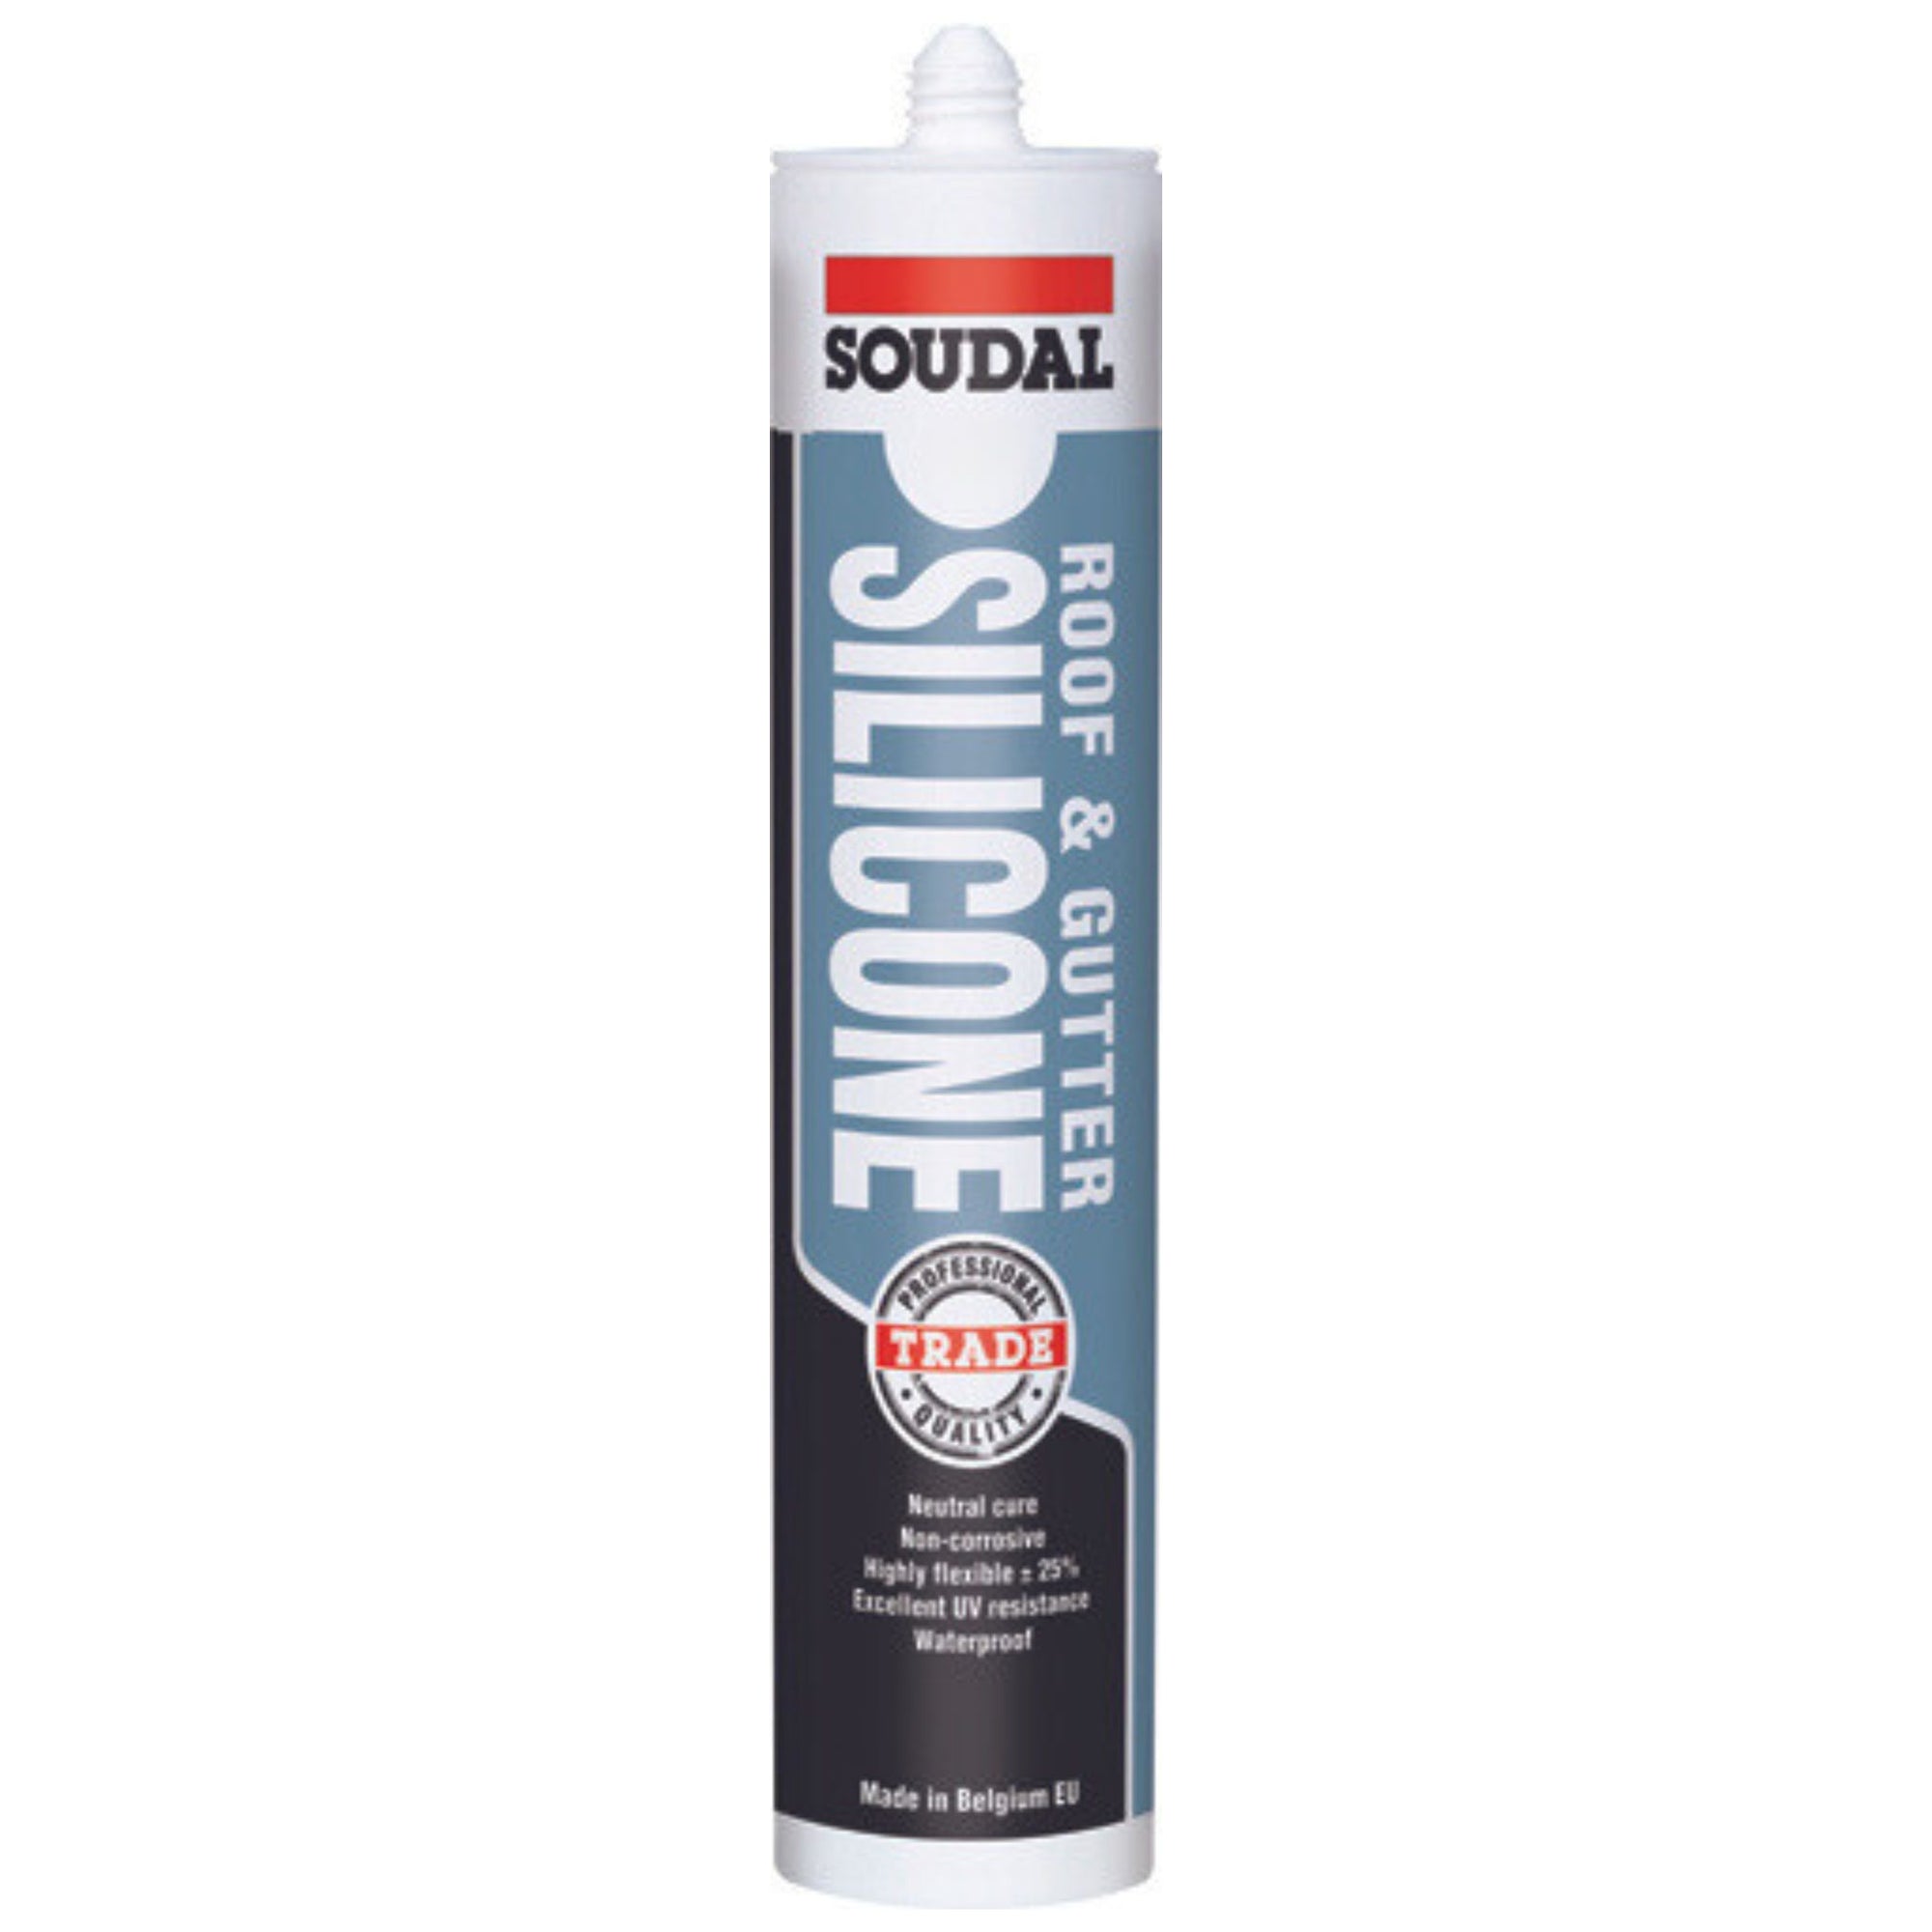 Soudal 127778 Roof & Gutter Neutral Cure Silicone, Grey - South East Clearance Centre